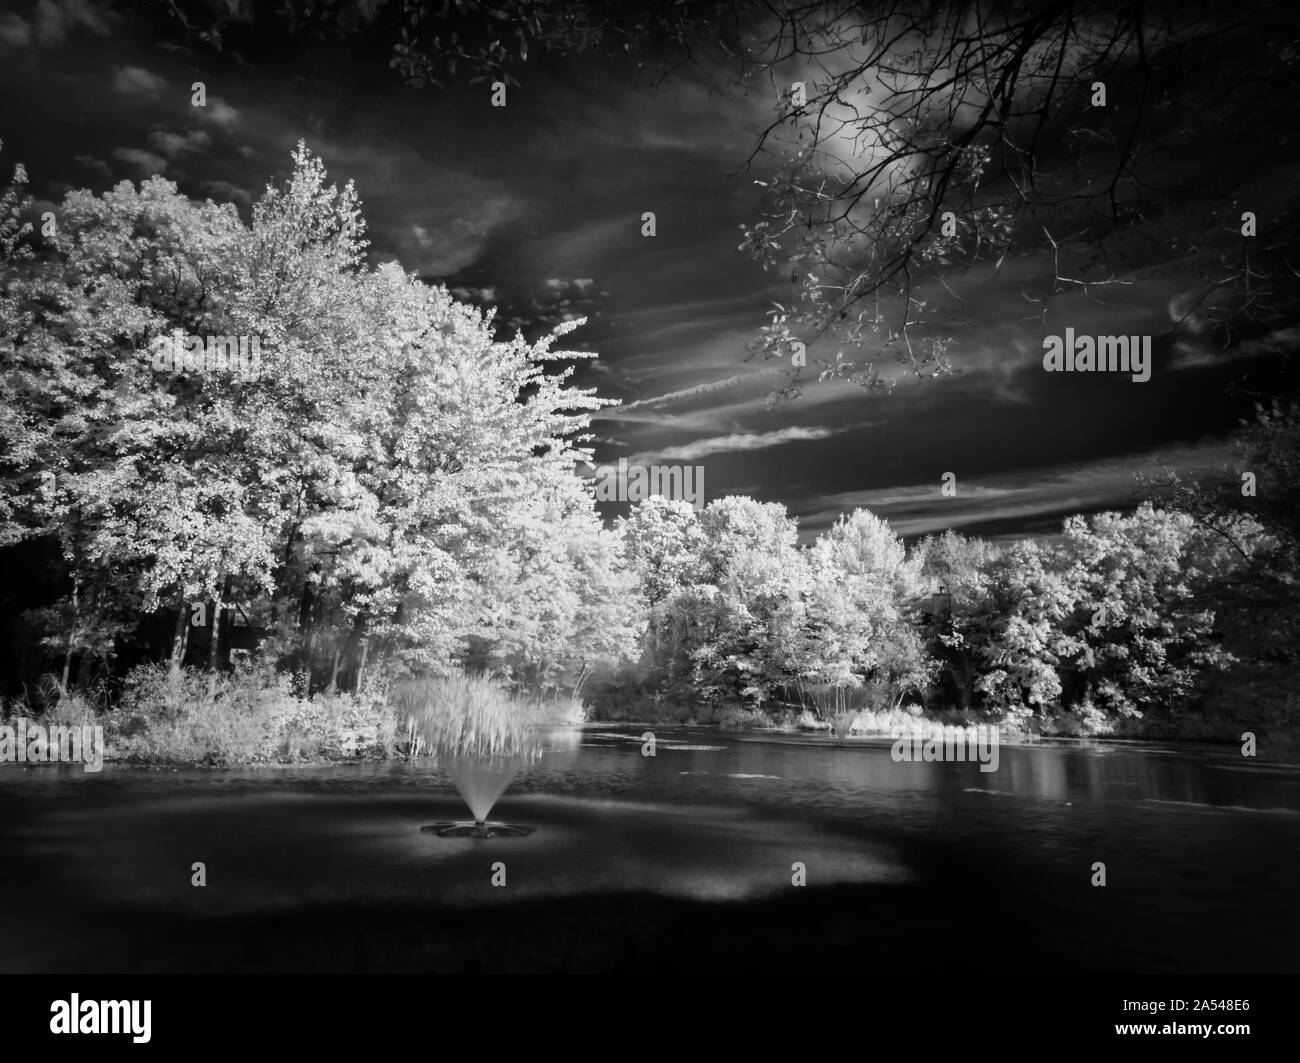 Infrared, fine art photograph of a pond with water fountains Stock Photo